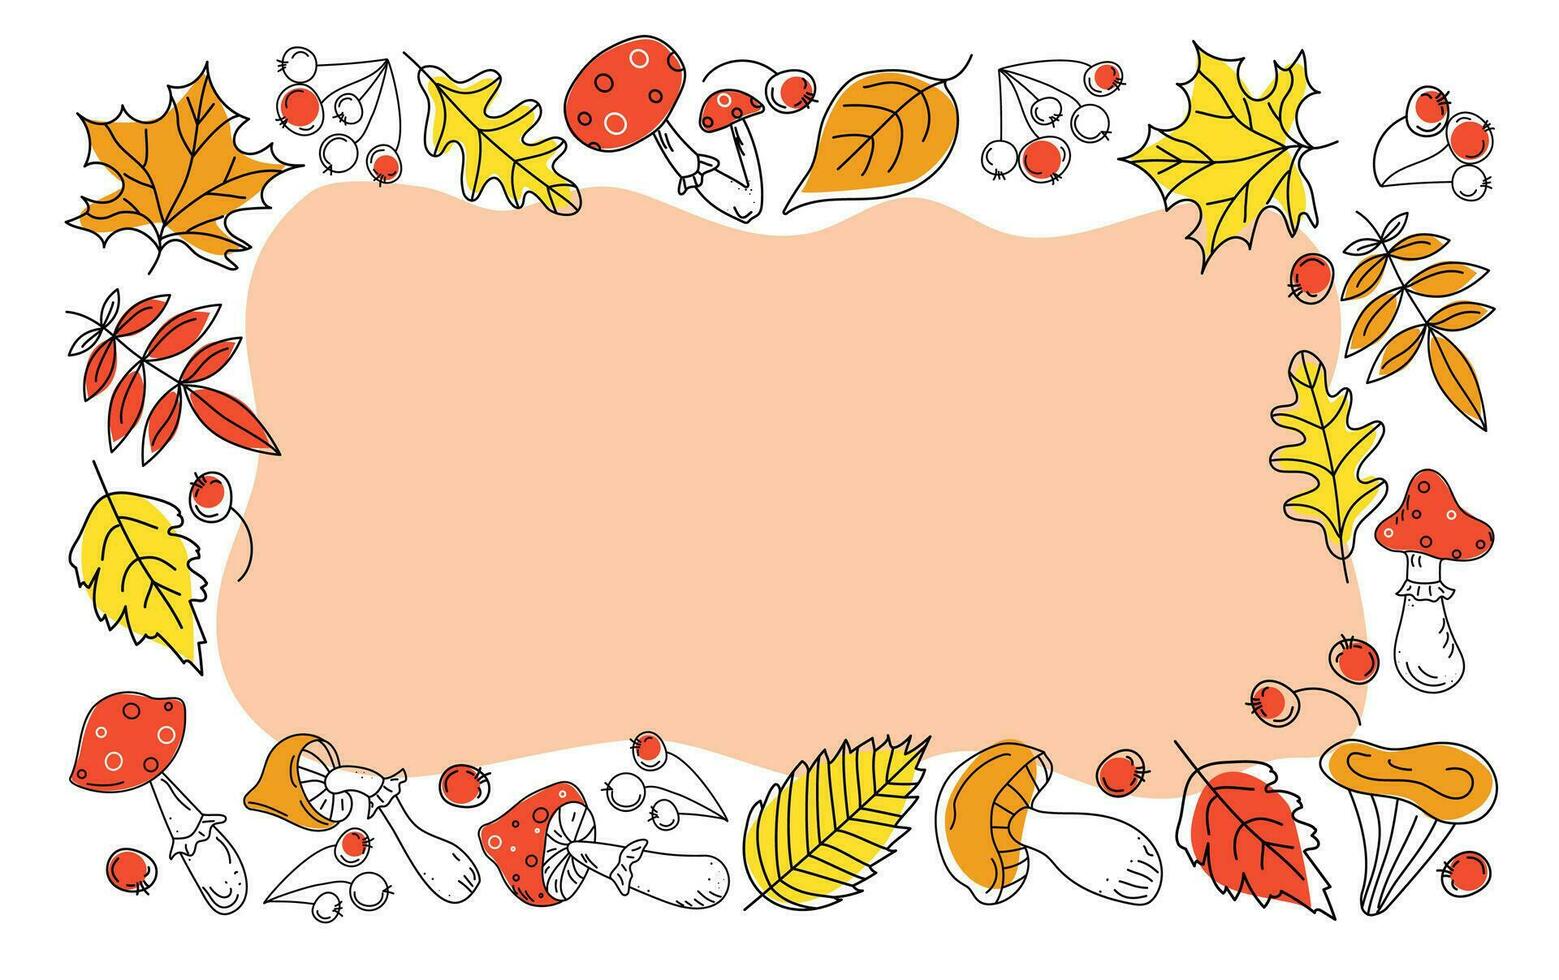 Autumn frame, border leaves, mushrooms and berries. Fly agaric, rowan branch, maple leaf, doodle, drawings, sketch. Vector illustration on color spots. Background white isolated.